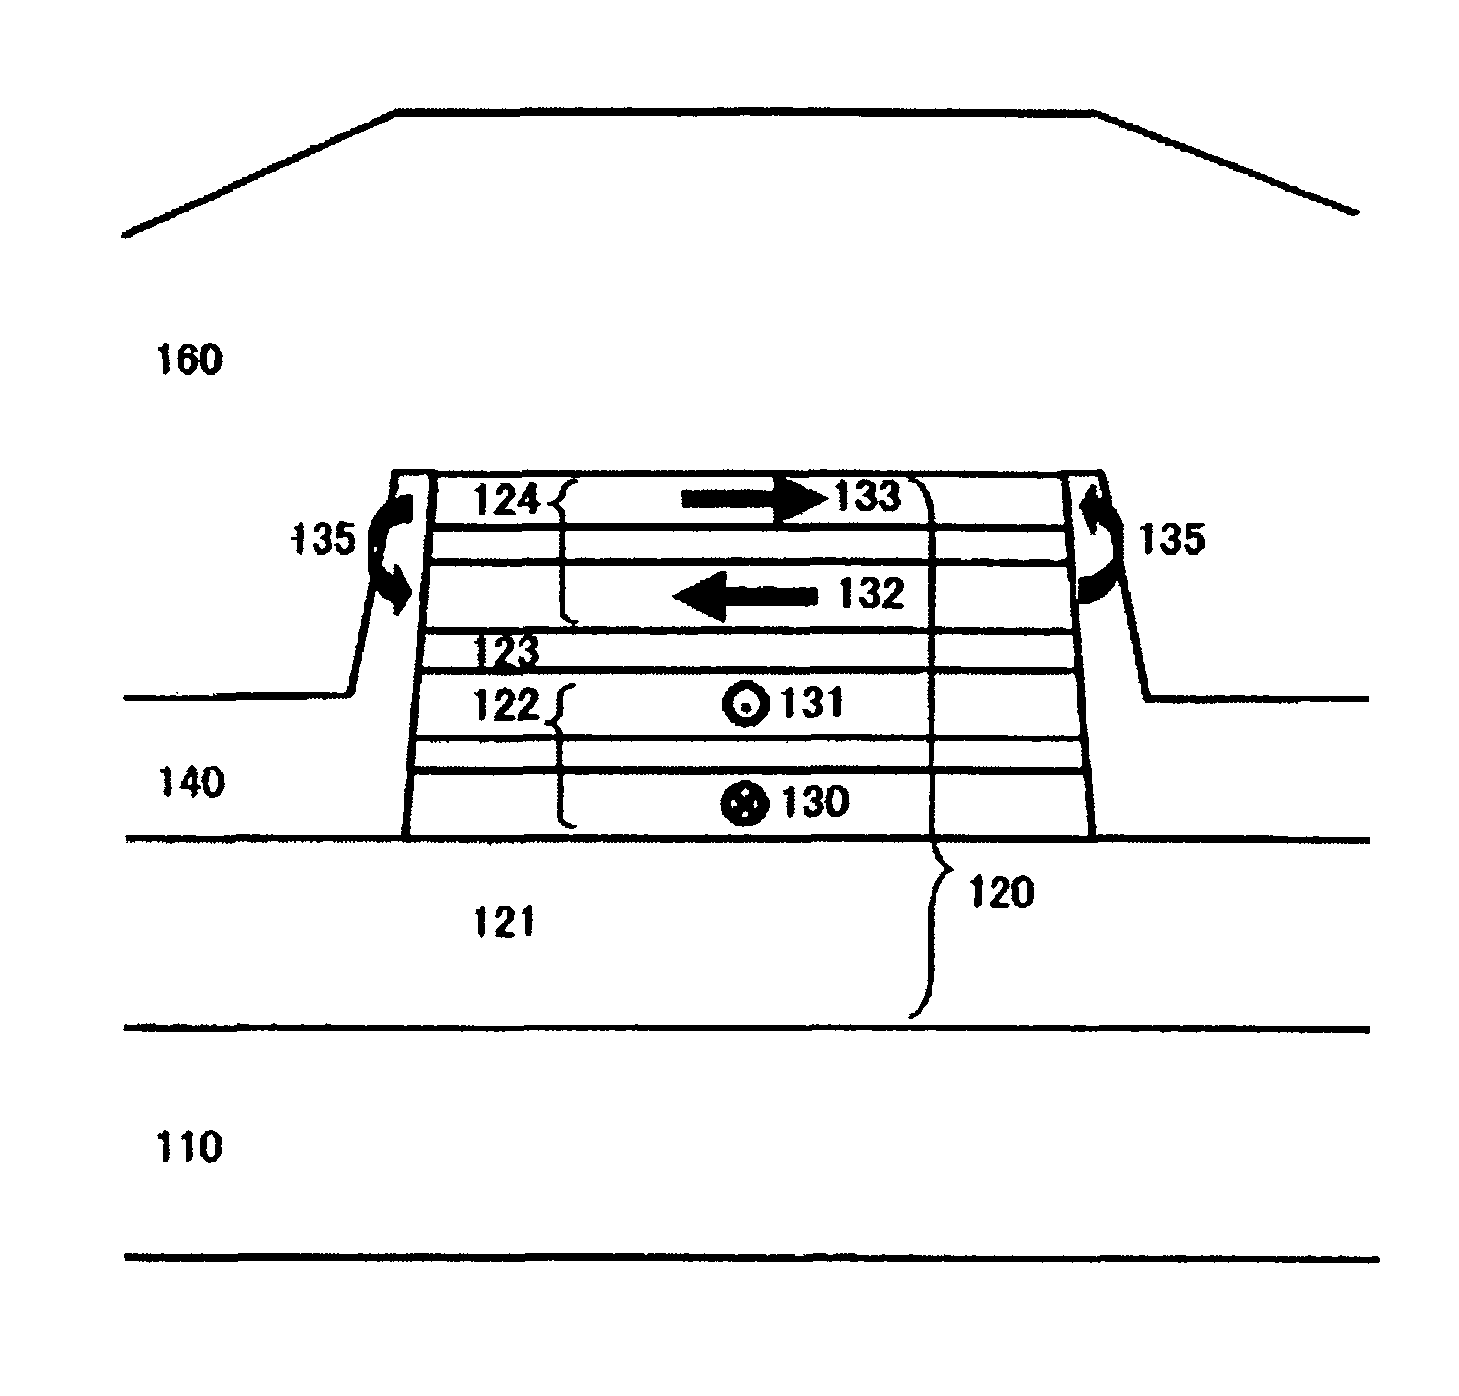 Magneto-resistive head having a stable response property without longitudinal biasing and method for manufacturing the same